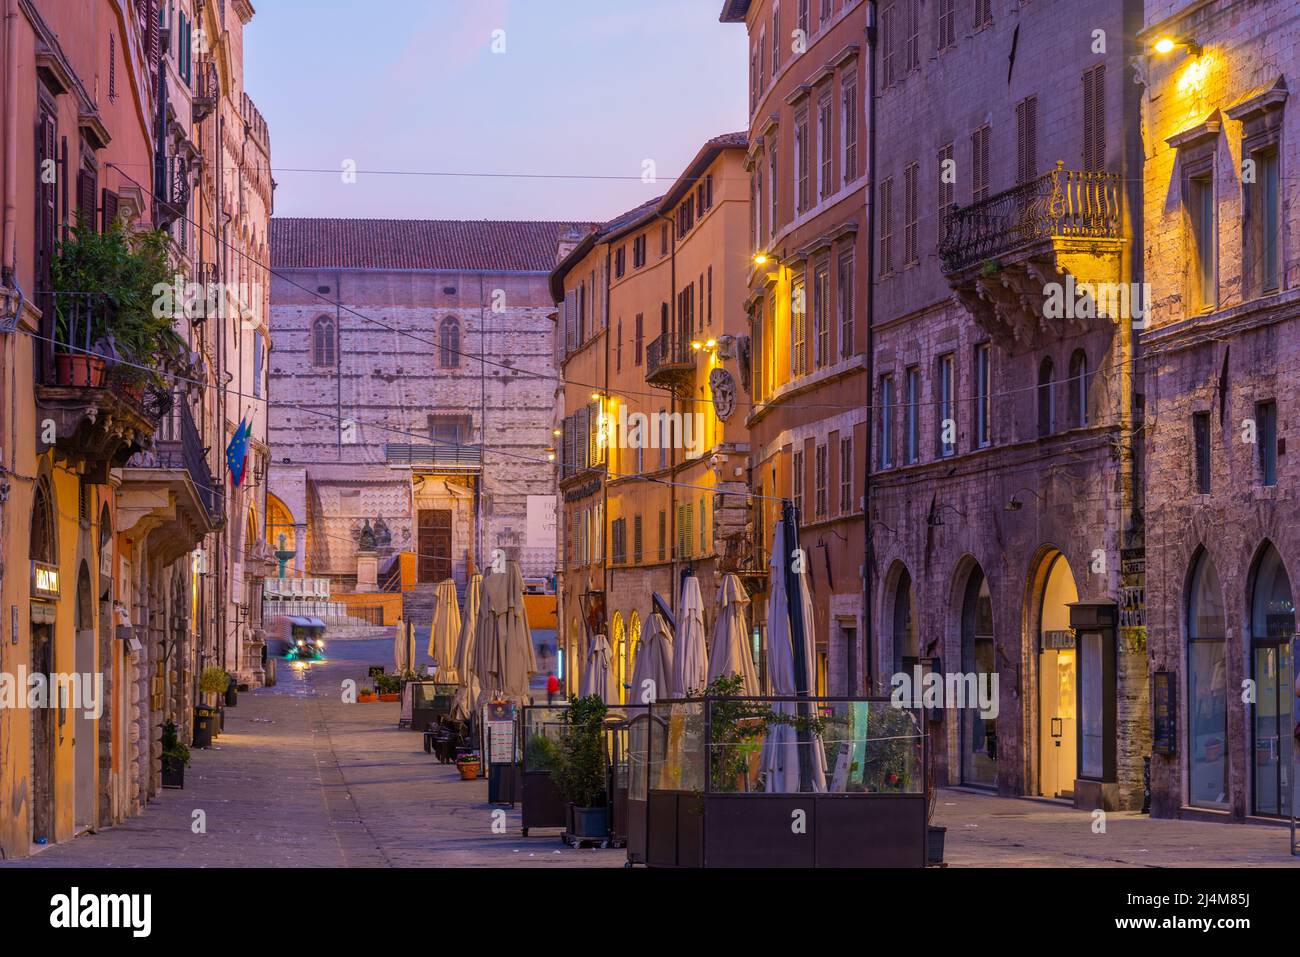 Perugia, Italy, October 2, 2021: Night view of Corso Pietro Vannucci in the old town of Perugia in Italy. Stock Photo